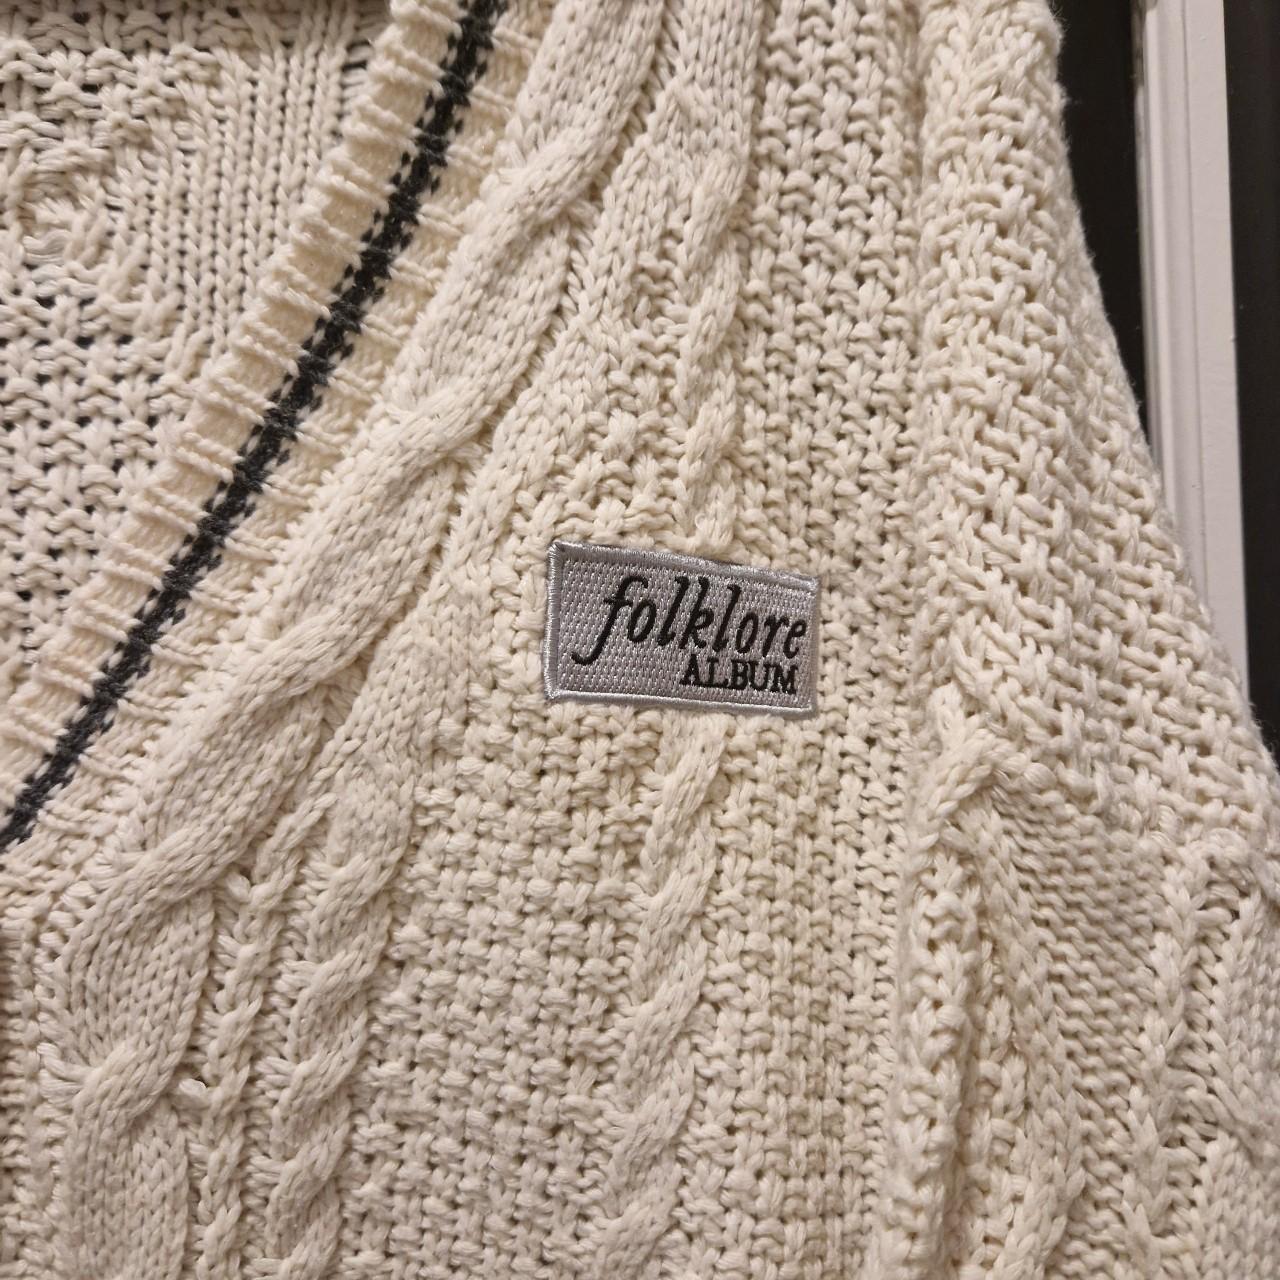 Taylor Swift folklore patch cardigan in a size xl /... - Depop